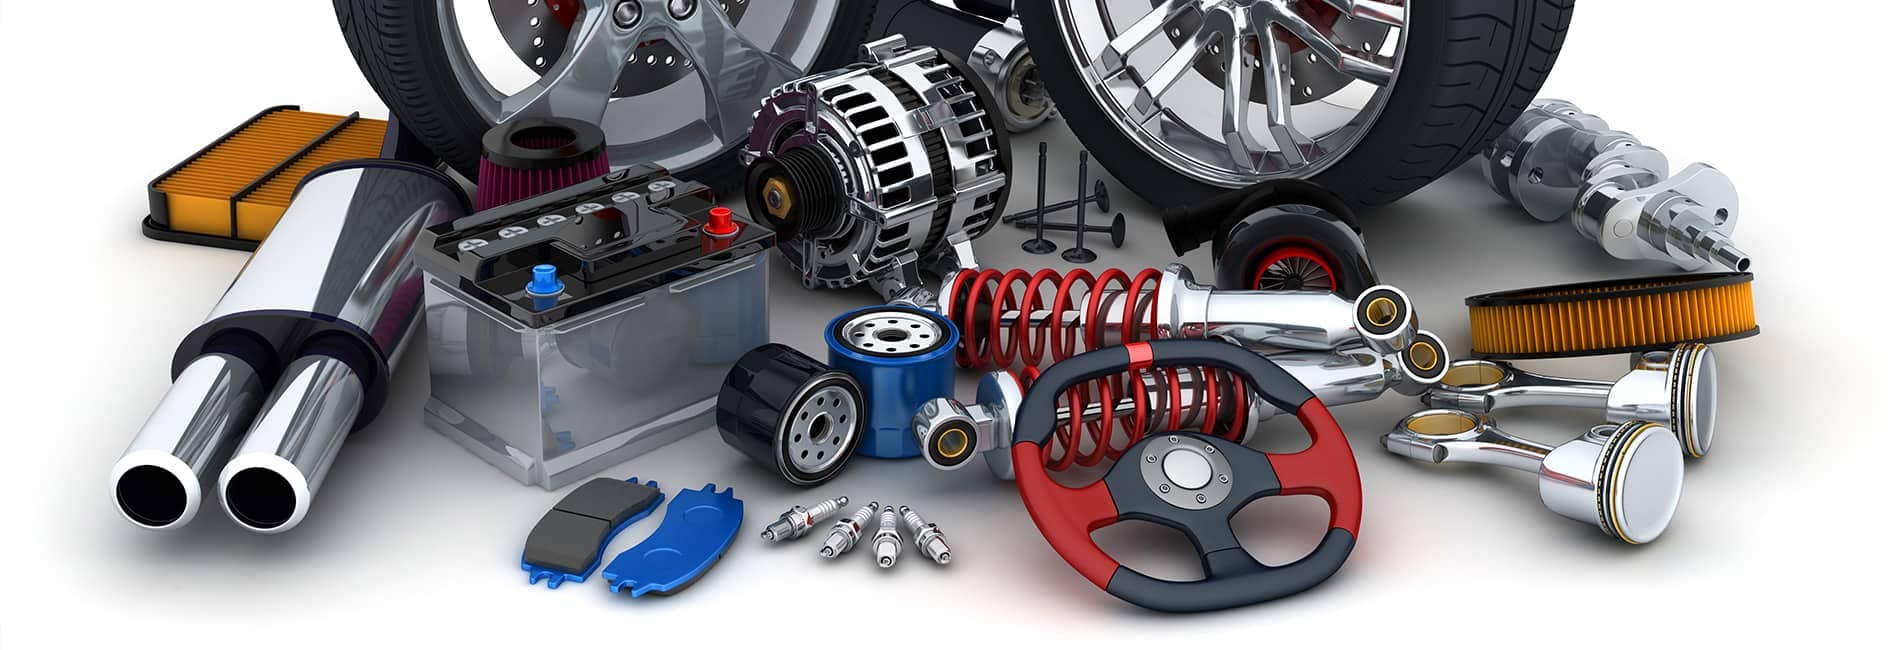 cars and tools spread over a white background